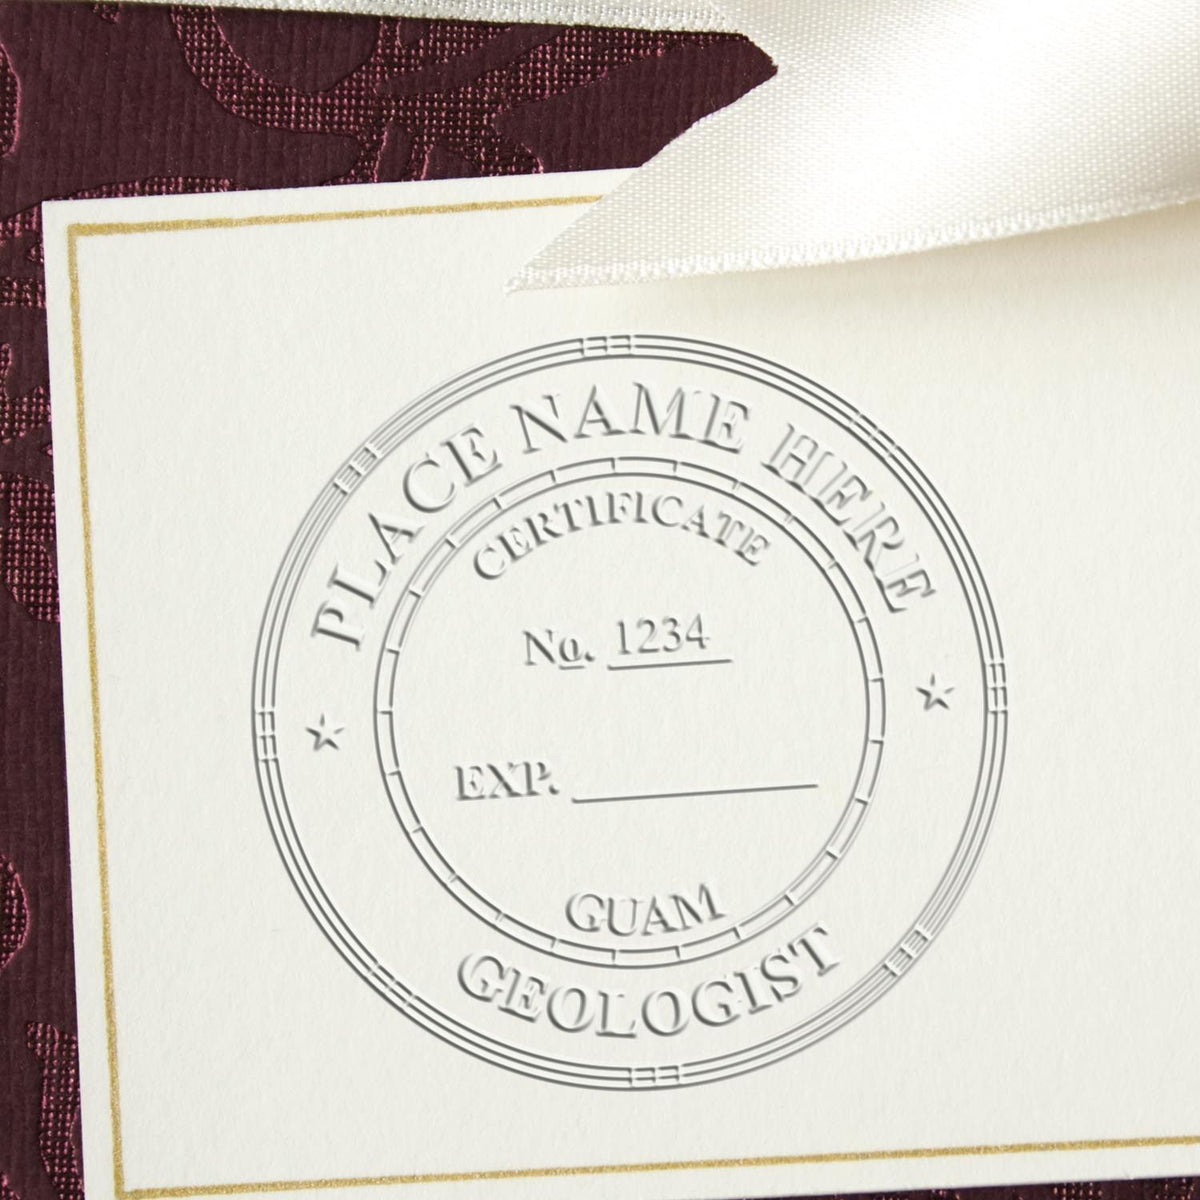 An in use photo of the Soft Guam Professional Geologist Seal showing a sample imprint on a cardstock